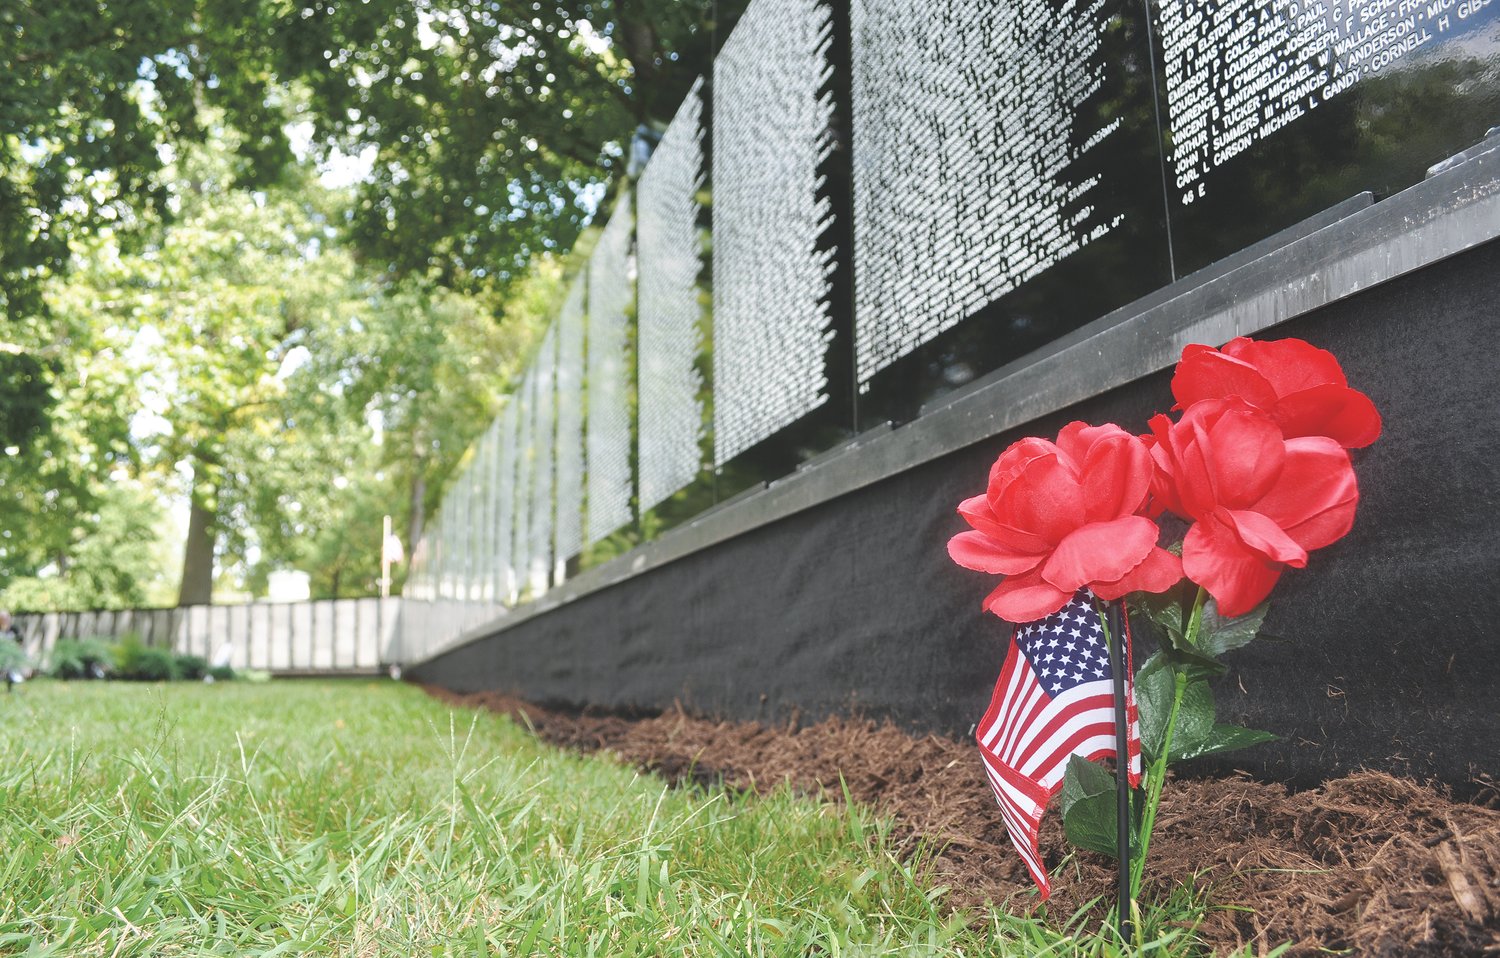 The Vietnam Traveling Memorial Wall was on display at the Lane Place.